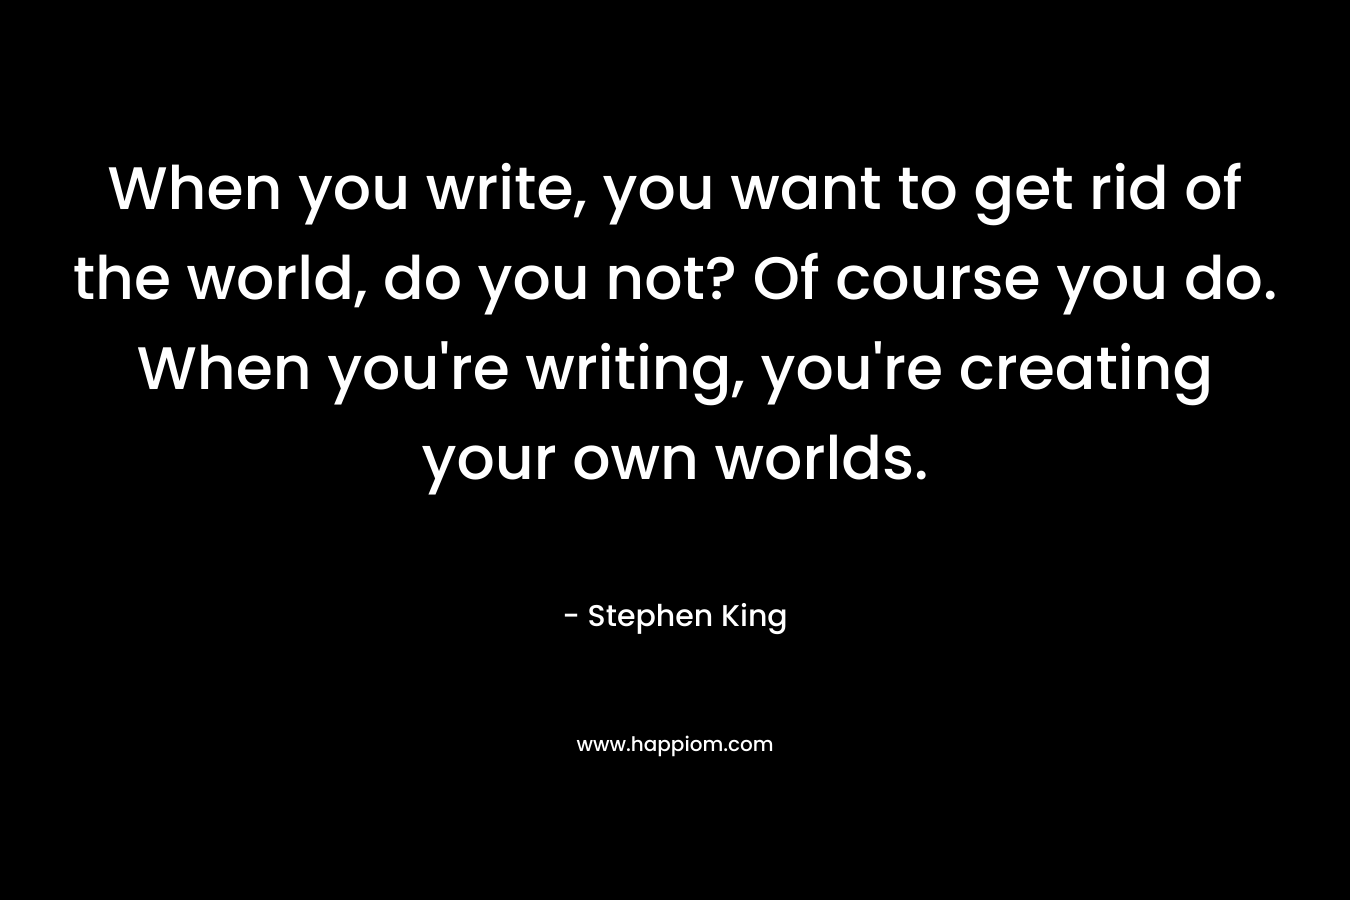 When you write, you want to get rid of the world, do you not? Of course you do. When you're writing, you're creating your own worlds.